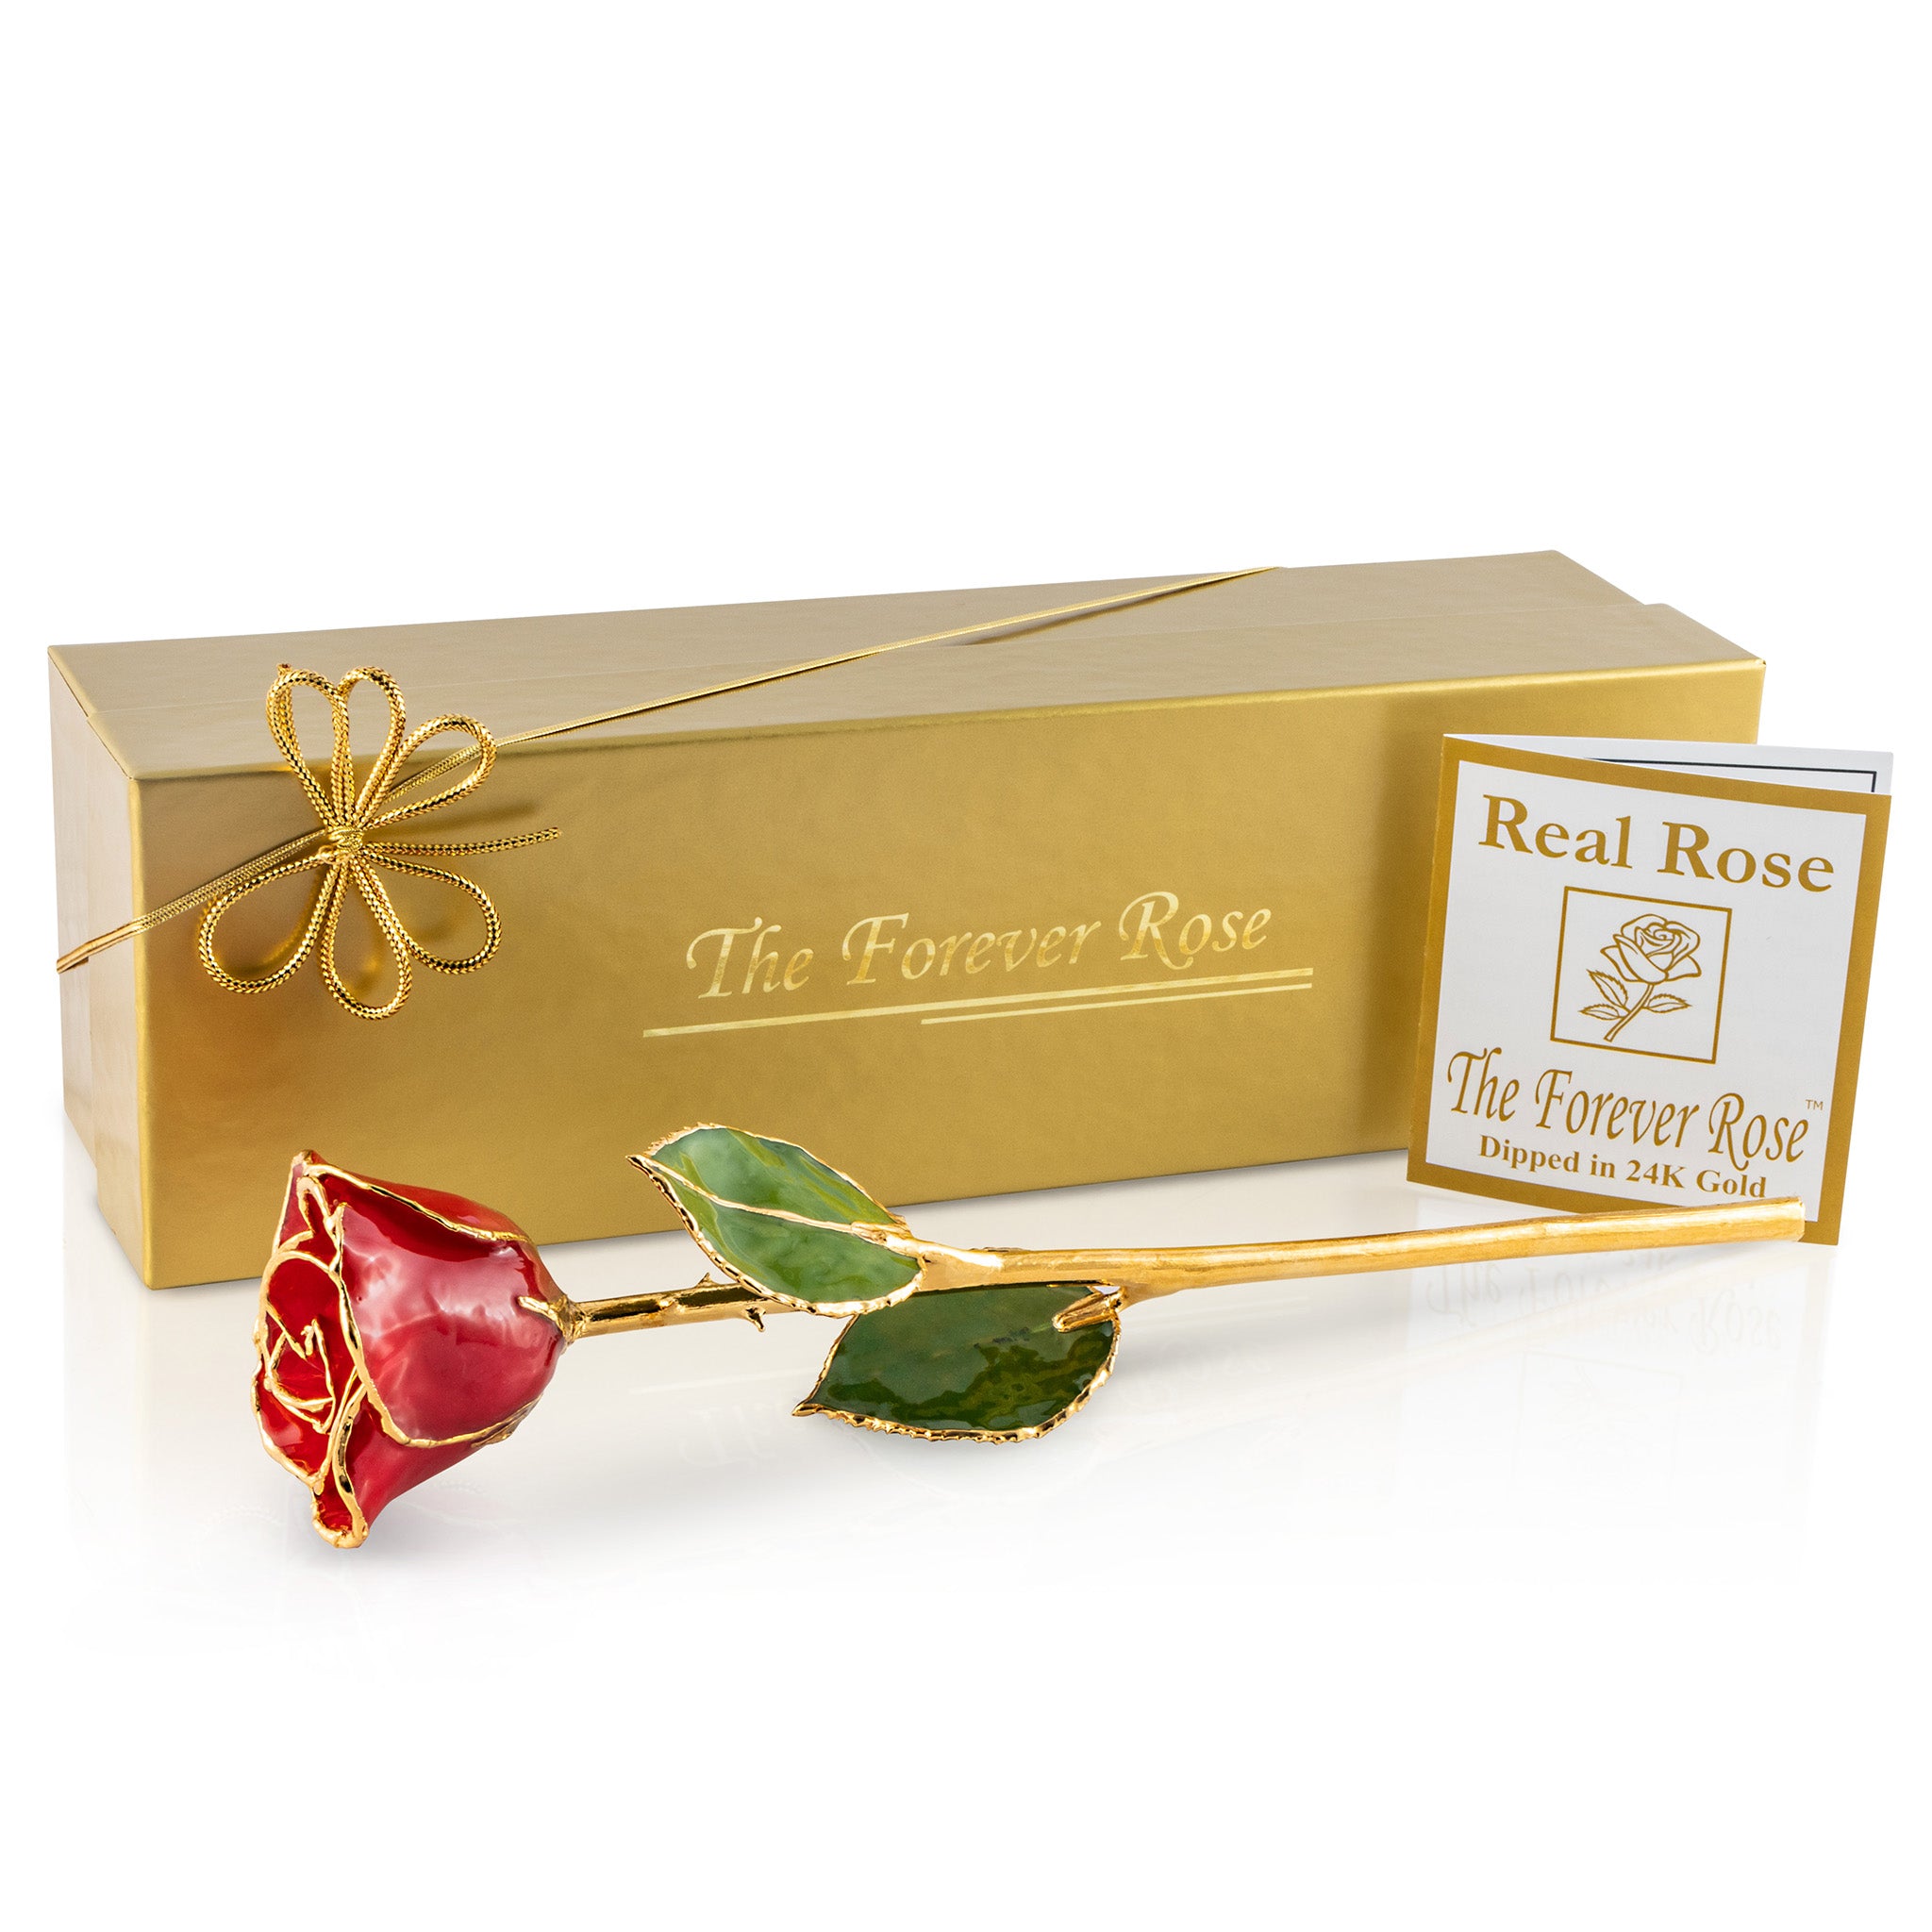 24K Gold Trimmed Forever Rose with Red Petals. View of Stem, Leaves, and Rose Petals and Showing Detail of Gold Trim Shown with Gold Gift box and certificate of authenticity